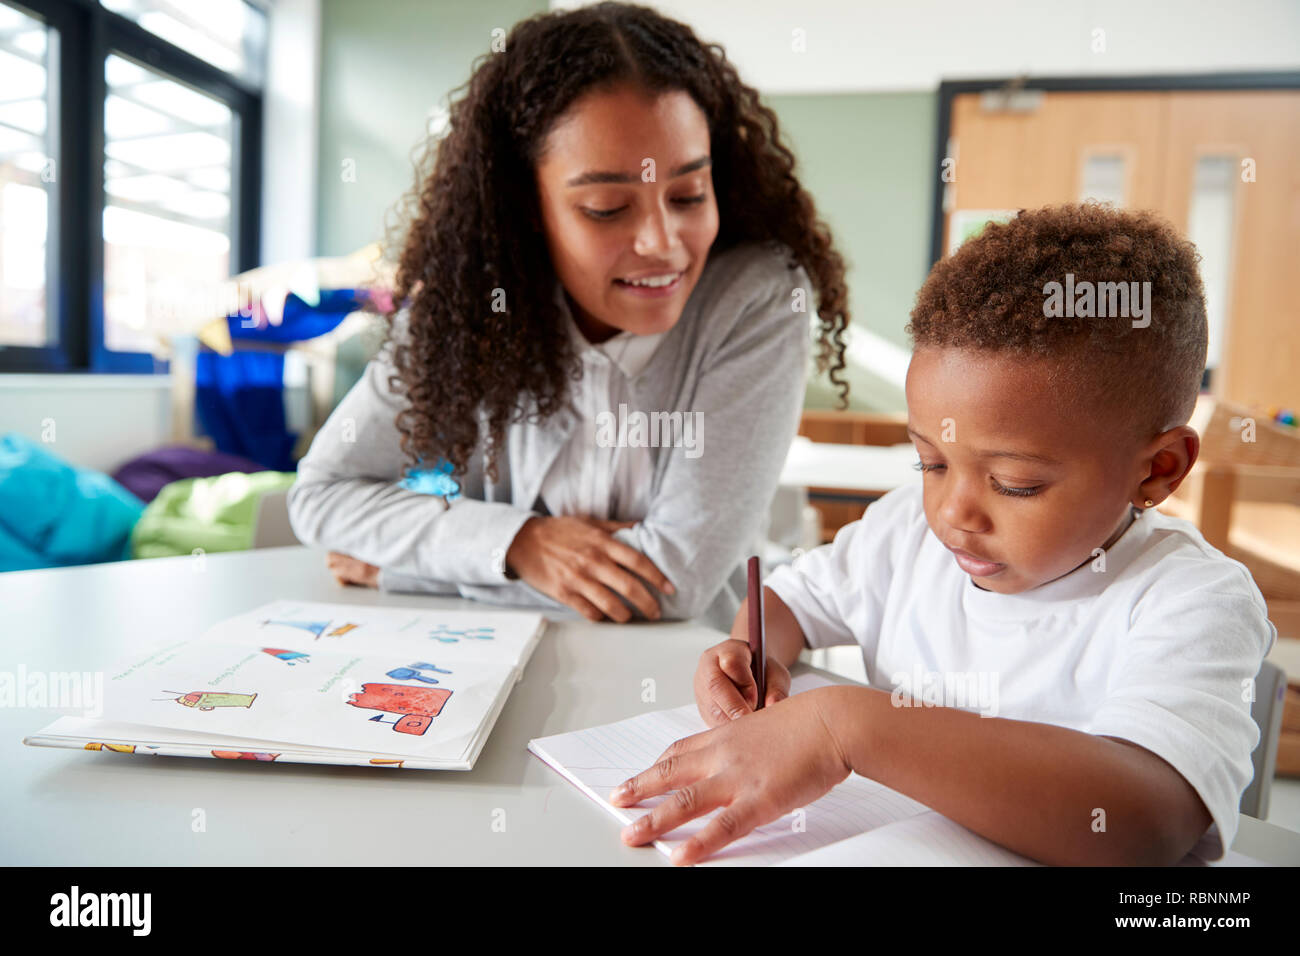 Female infant school teacher working one on one with a young schoolboy, sitting at a table writing in a classroom, front view, close up Stock Photo